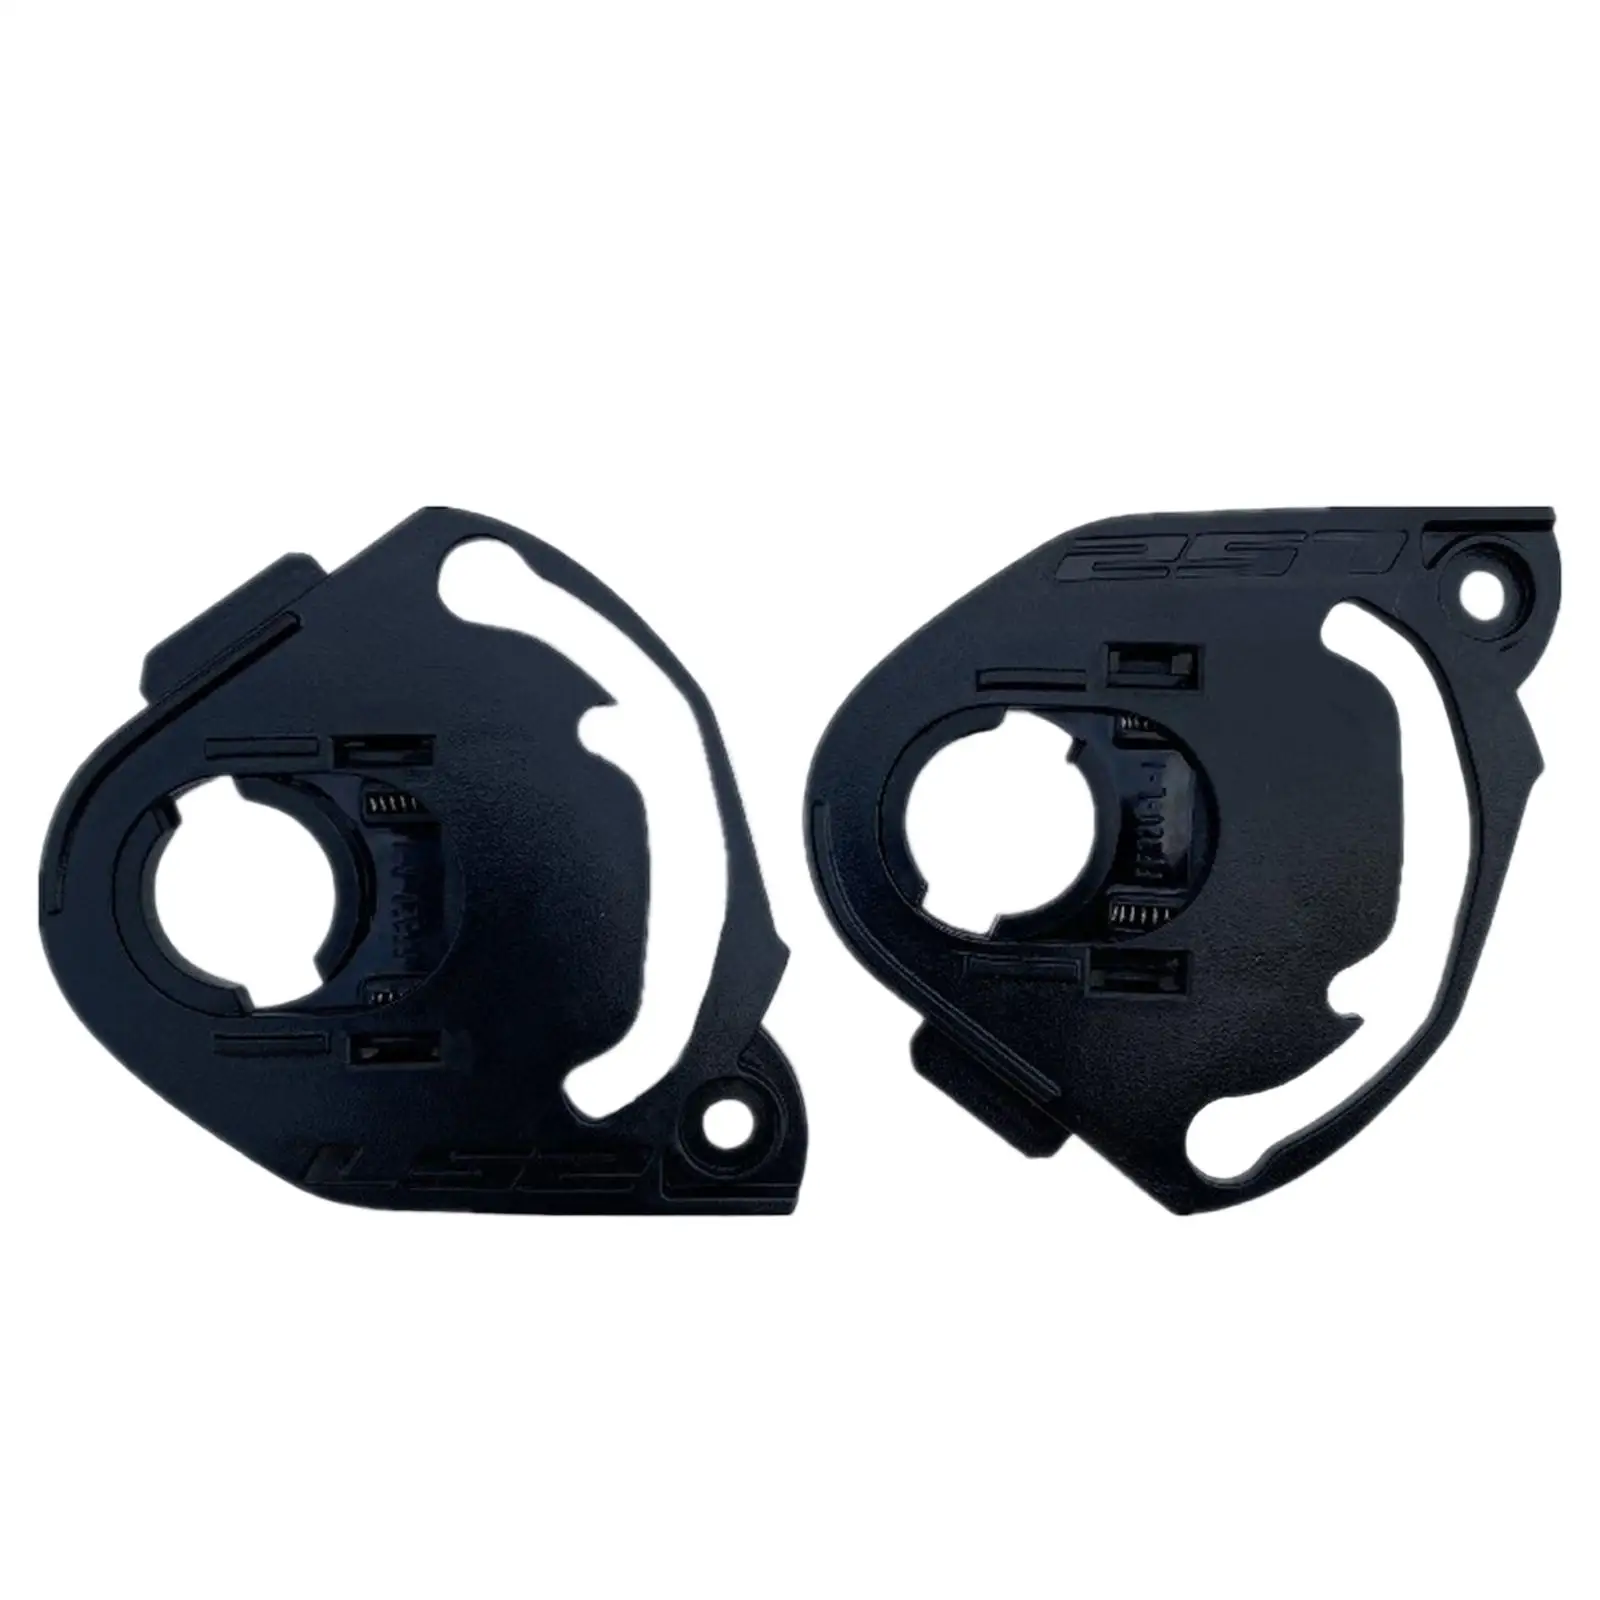 2x Motorcycle Accessories Side   Fit for Ff353 Ff800